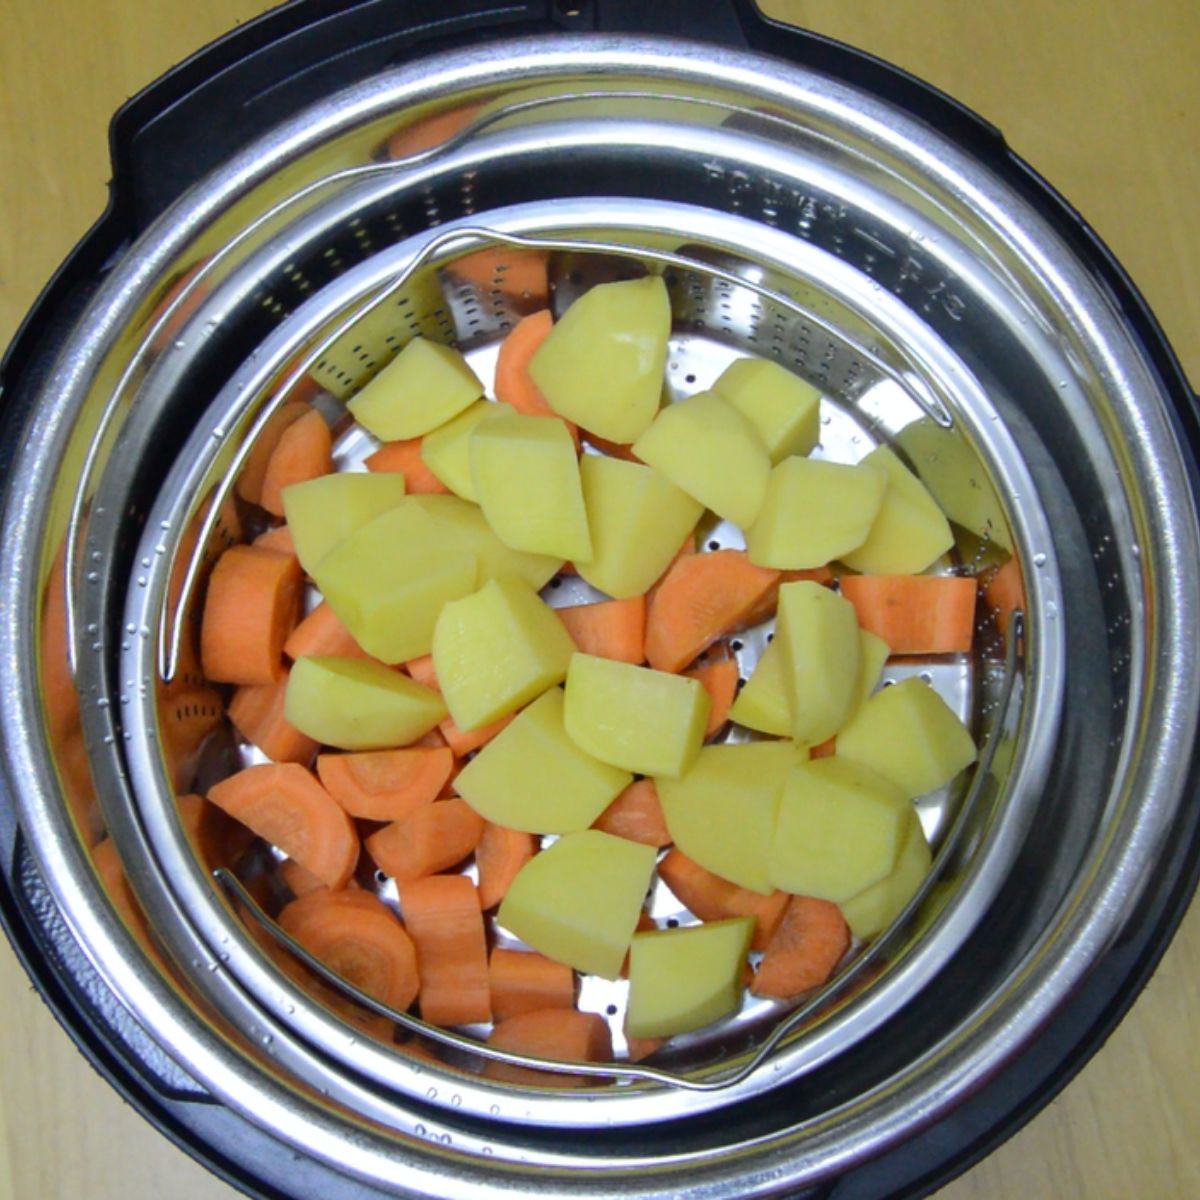 carrots and potatoes in a steamer inside the instant pot.